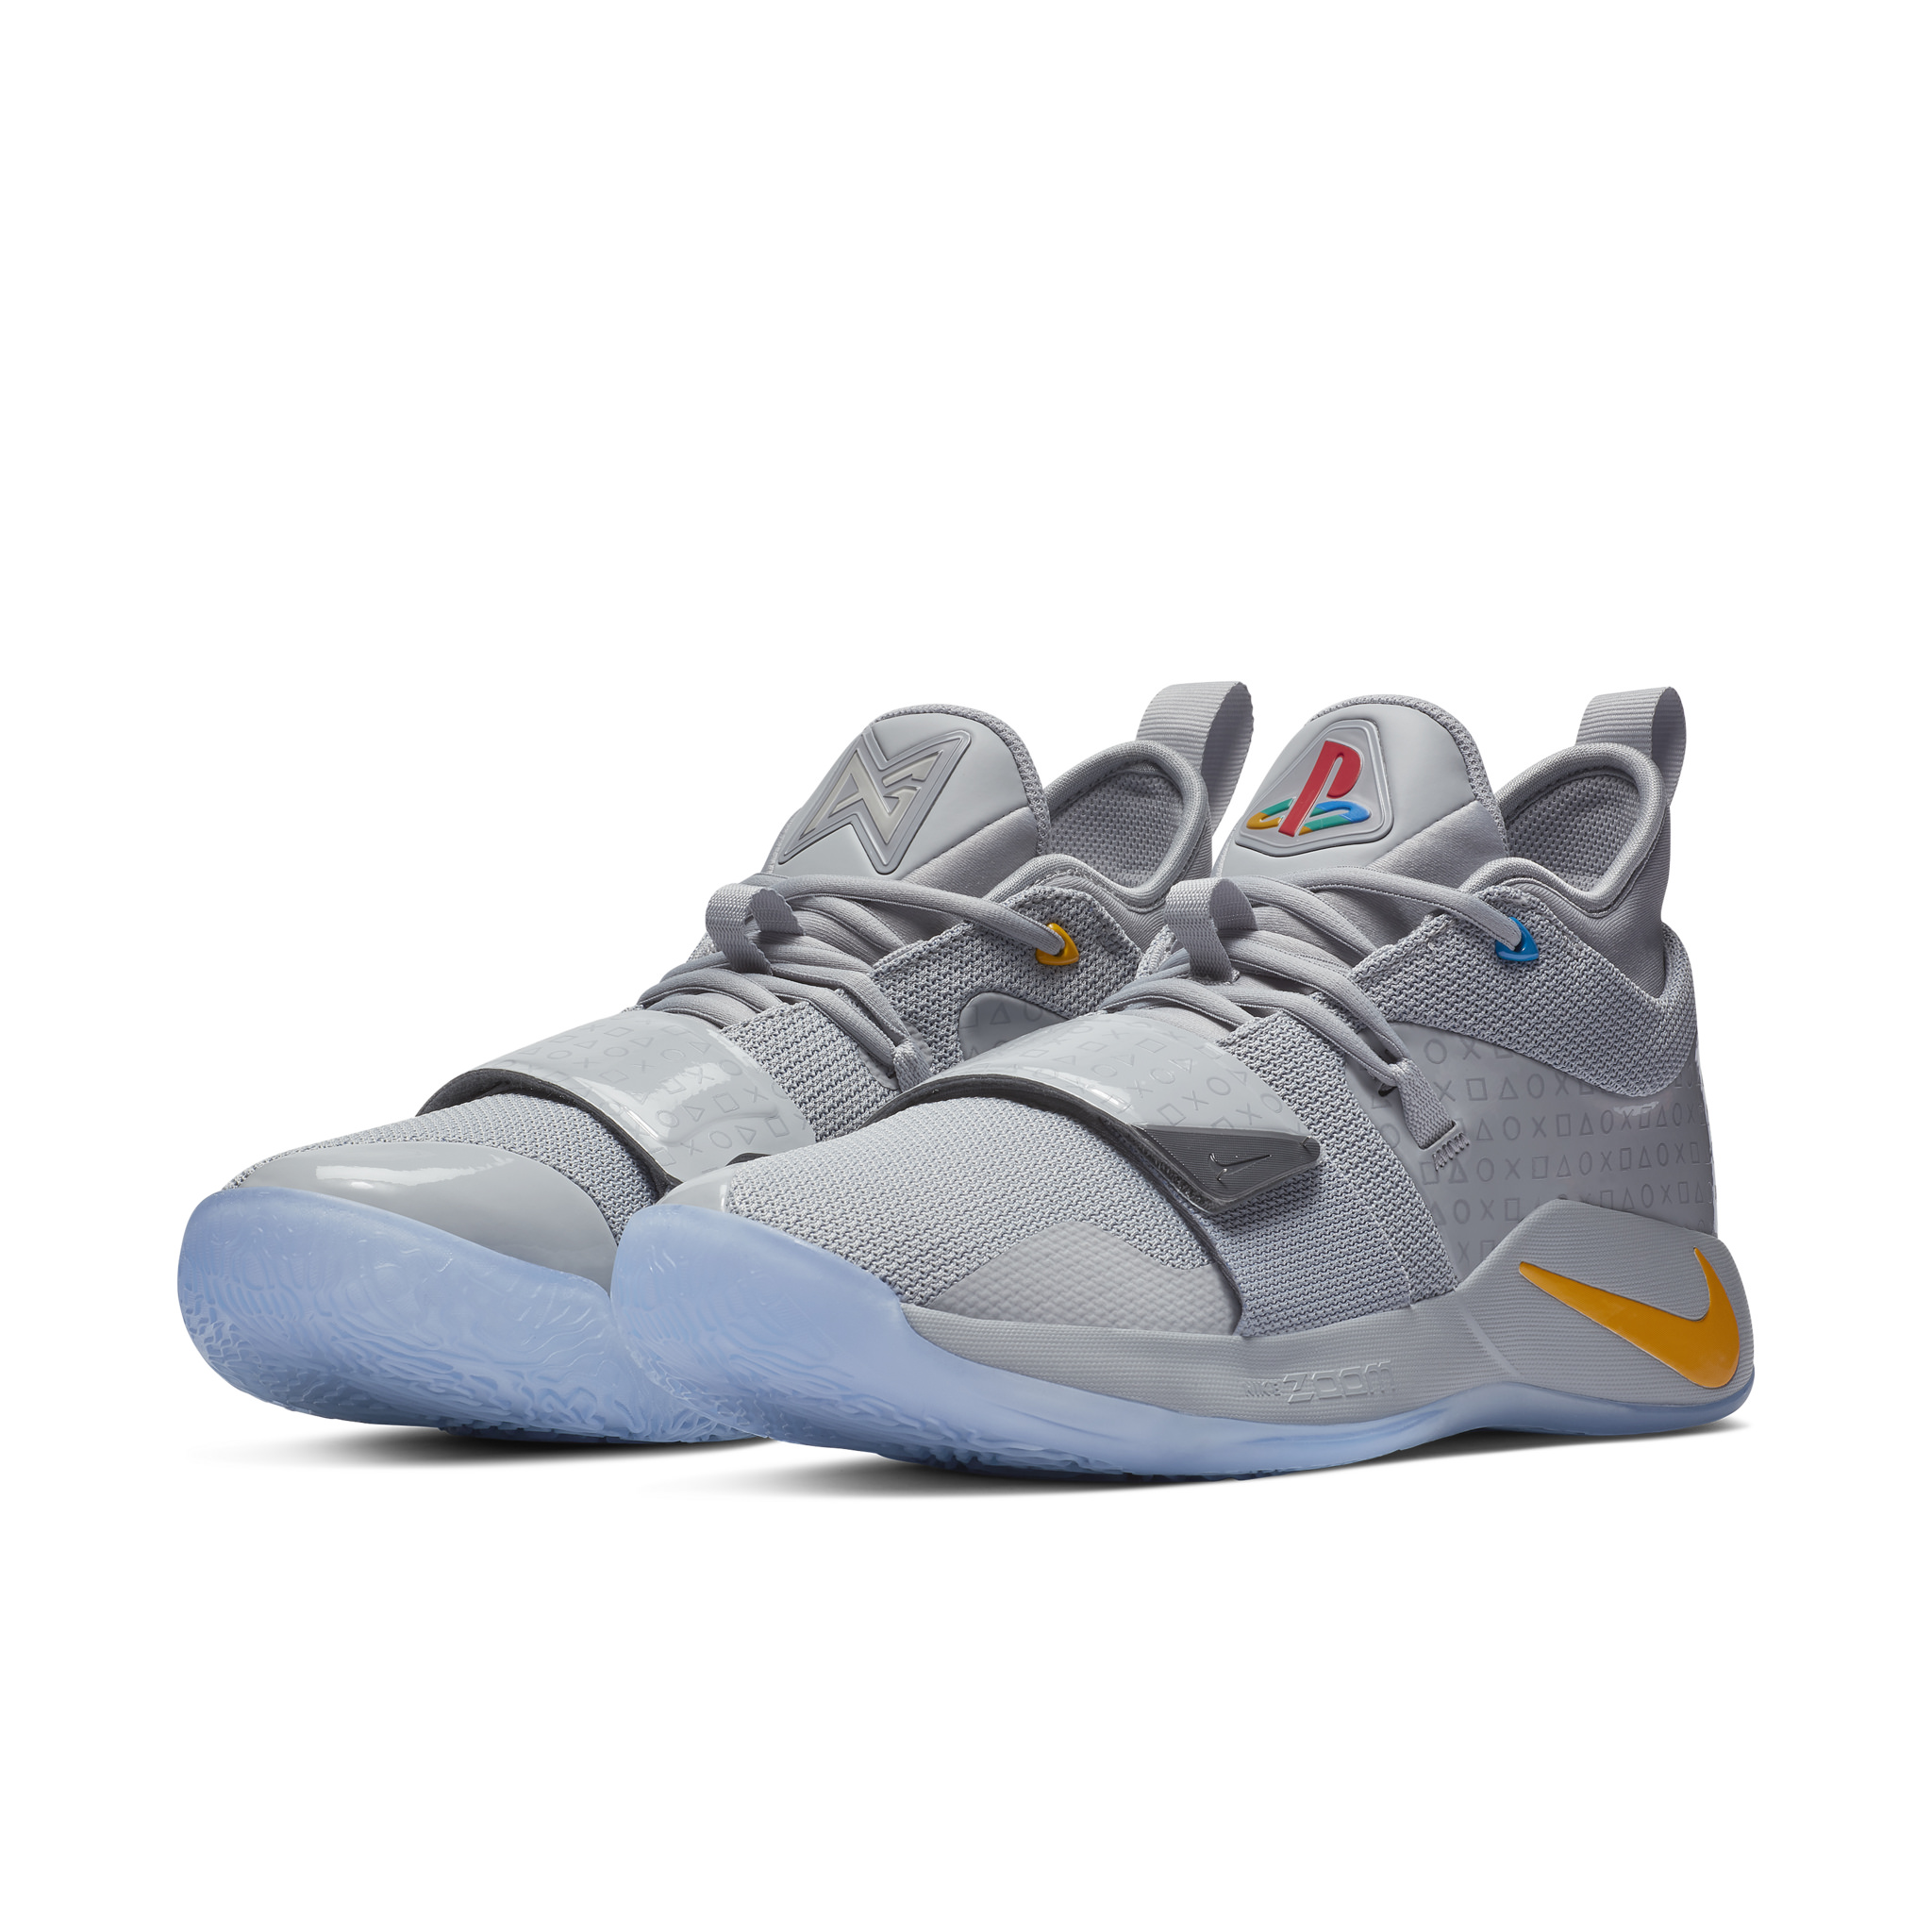 The Nike PG 2.5 x PlayStation collab is official, and it comes in the ...